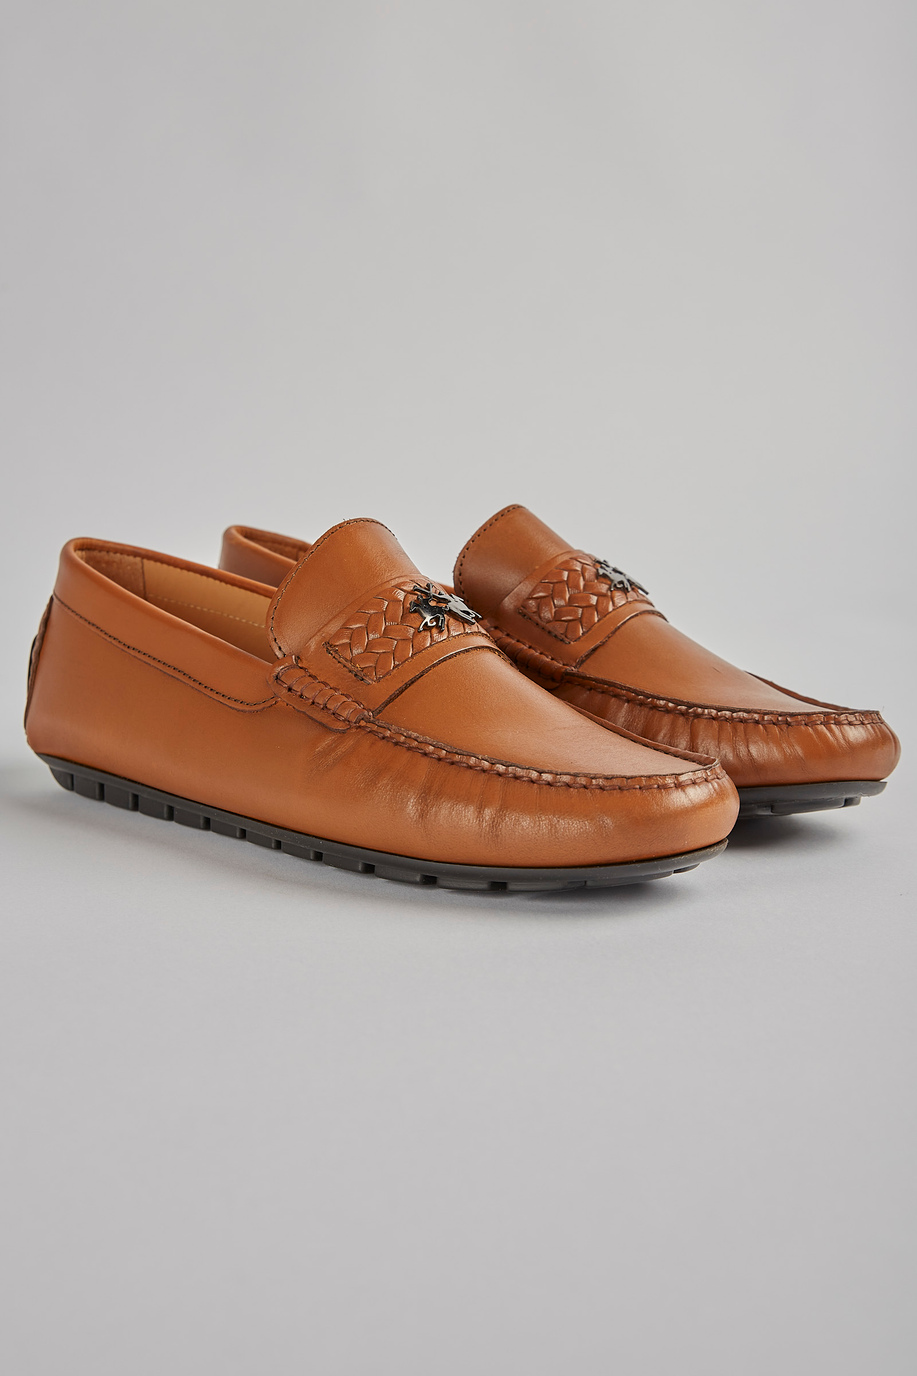 Hand-stitched leather loafer